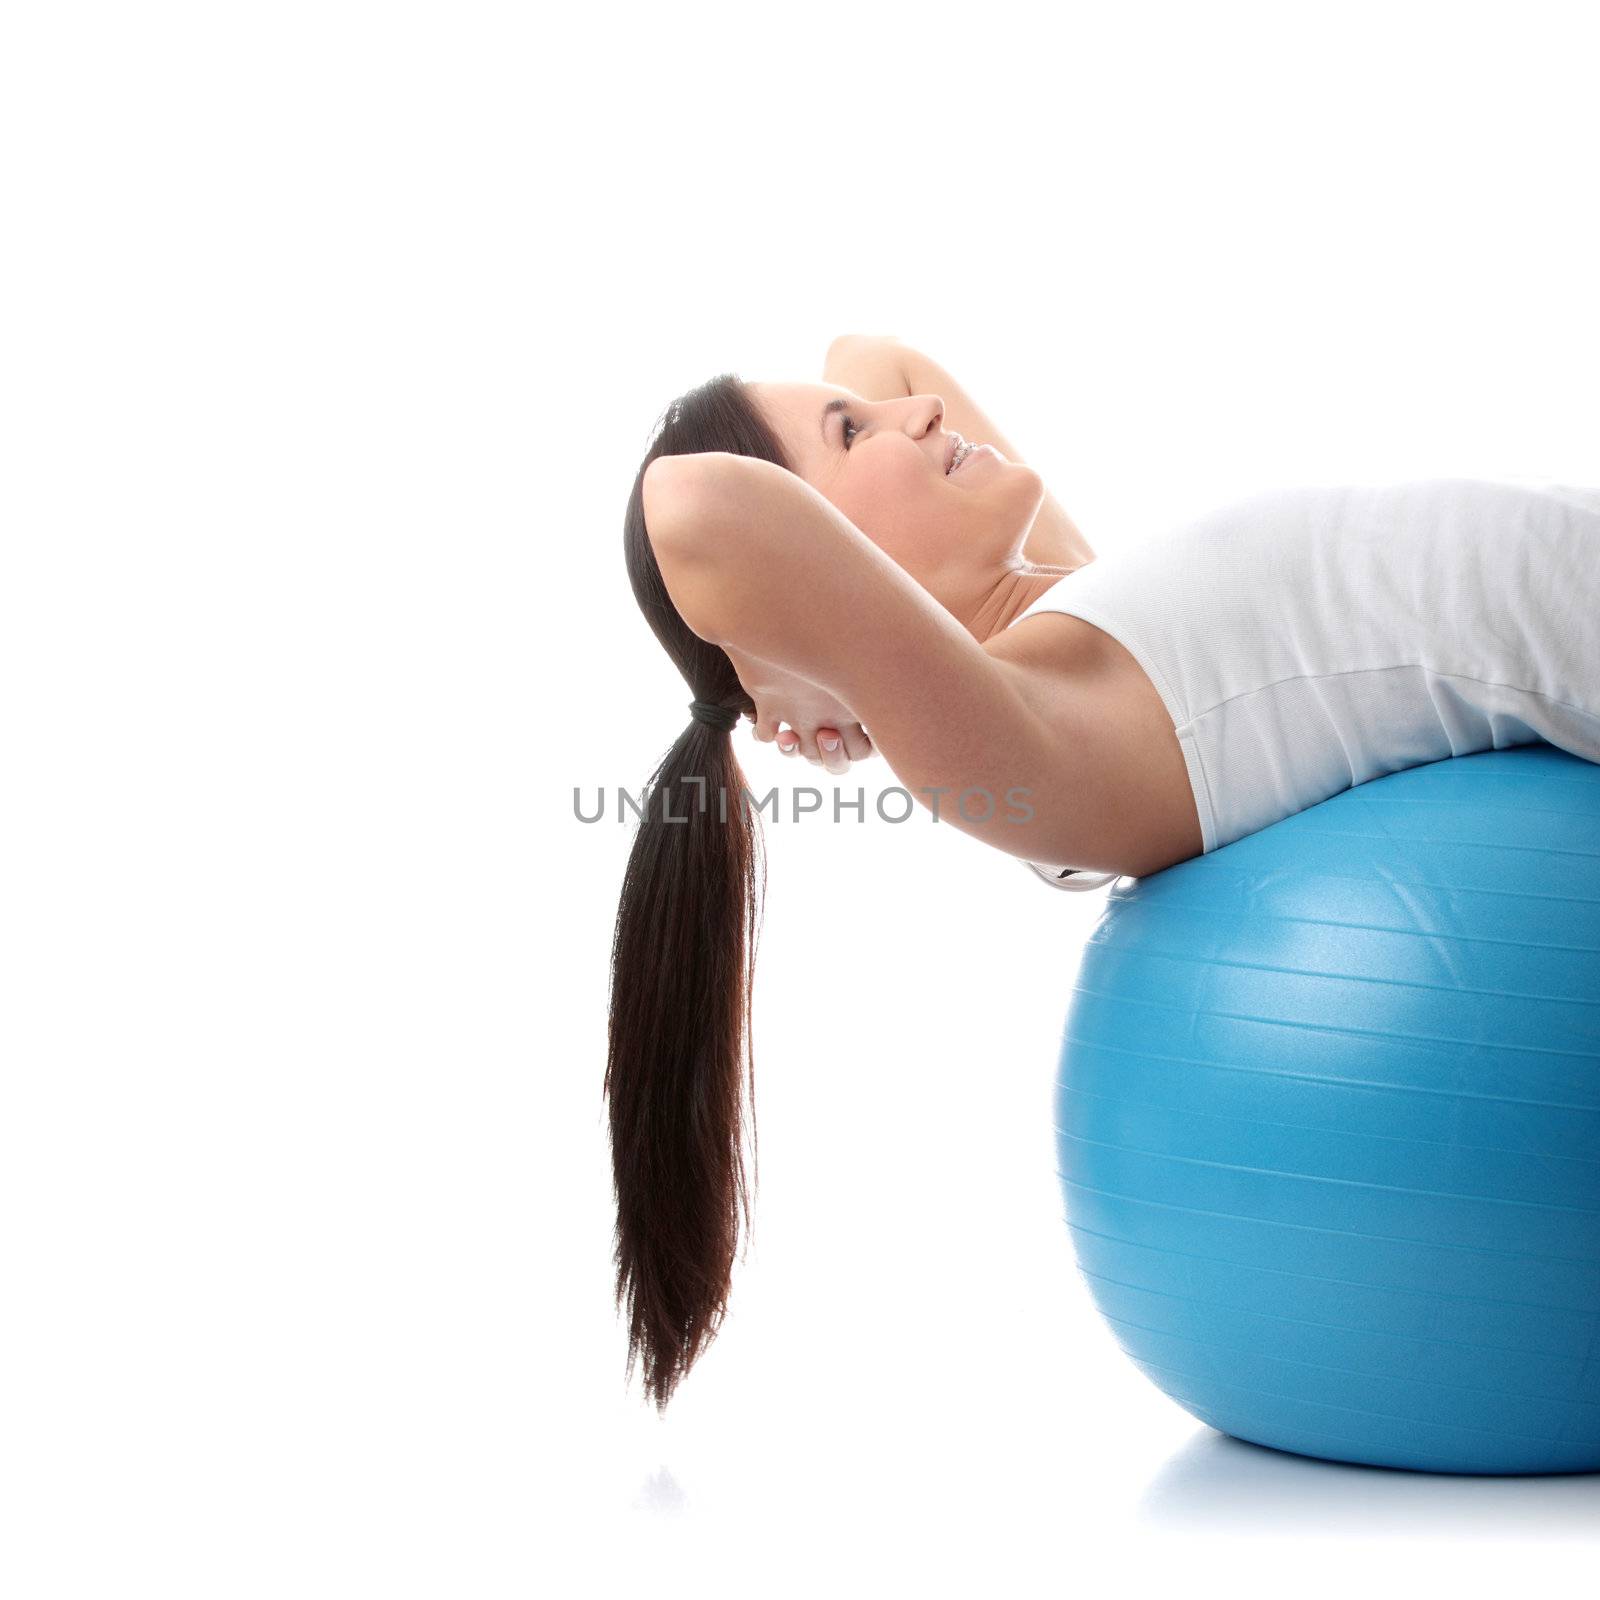 Young happy woman doing fitness exercise, isolated on white